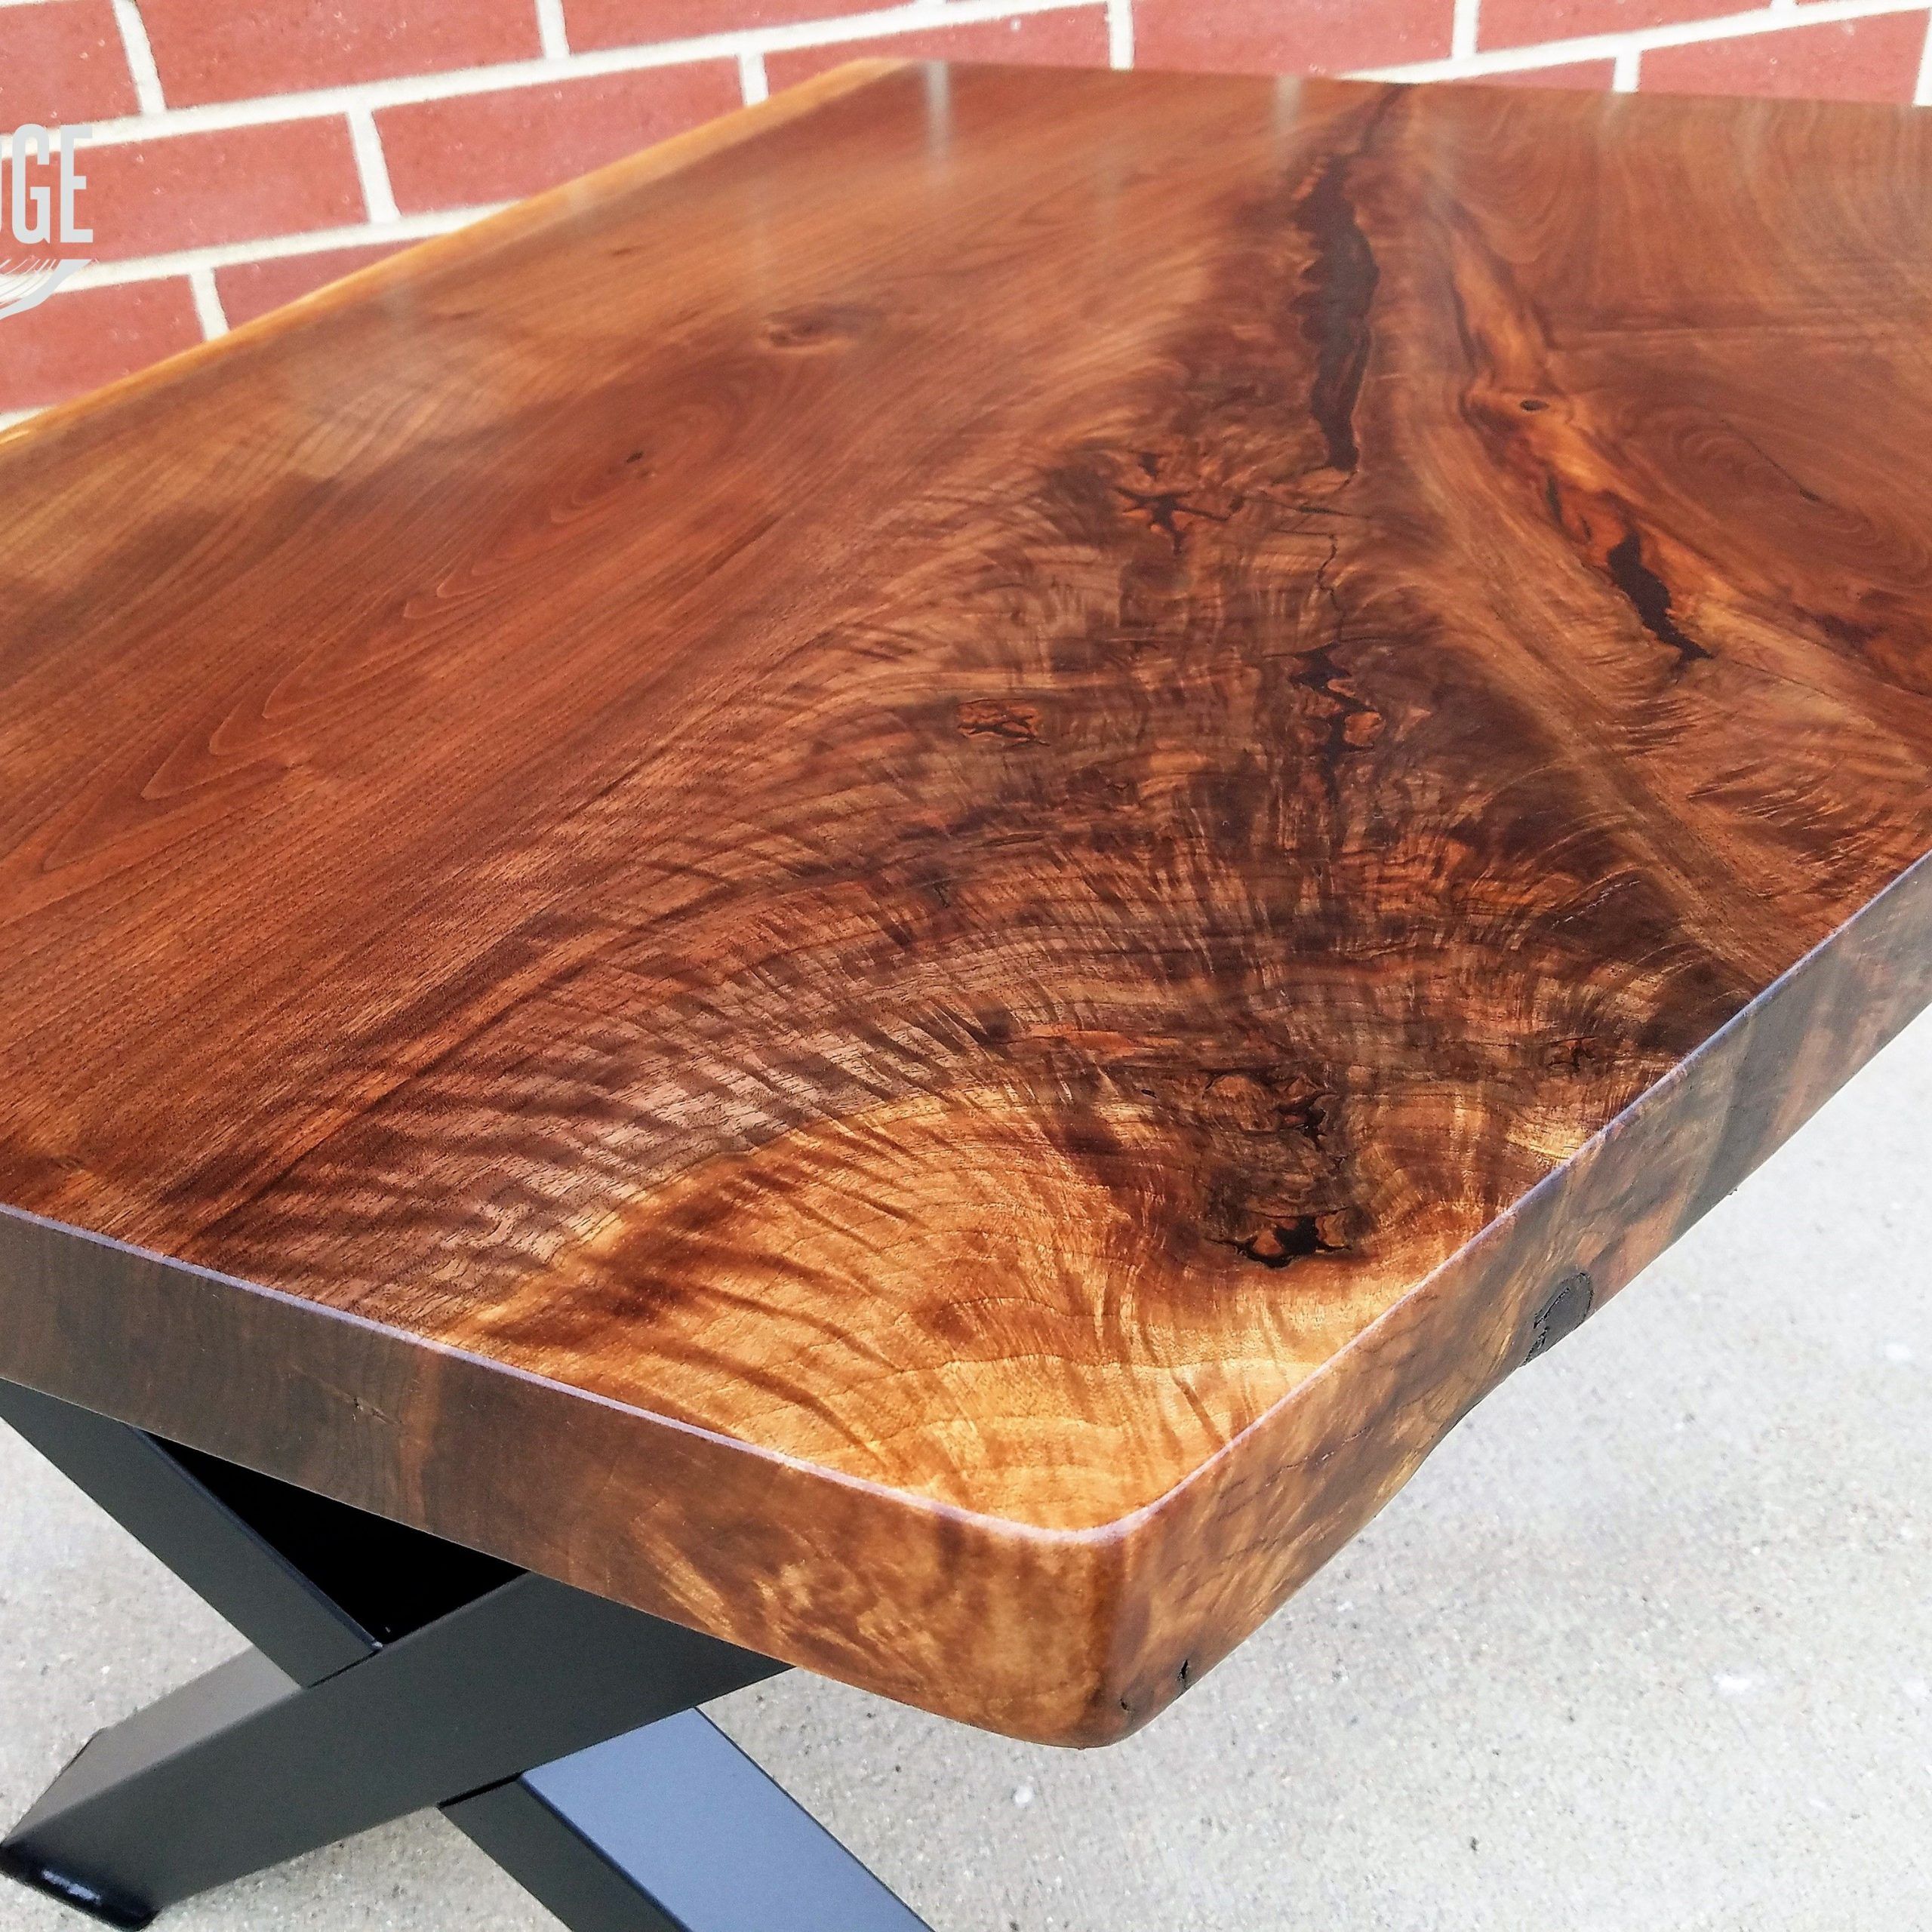 Hand Crafted Live Edge Coffee Table  Black Walnut  X Style With Regard To Rustic Walnut Wood Coffee Tables (View 7 of 15)